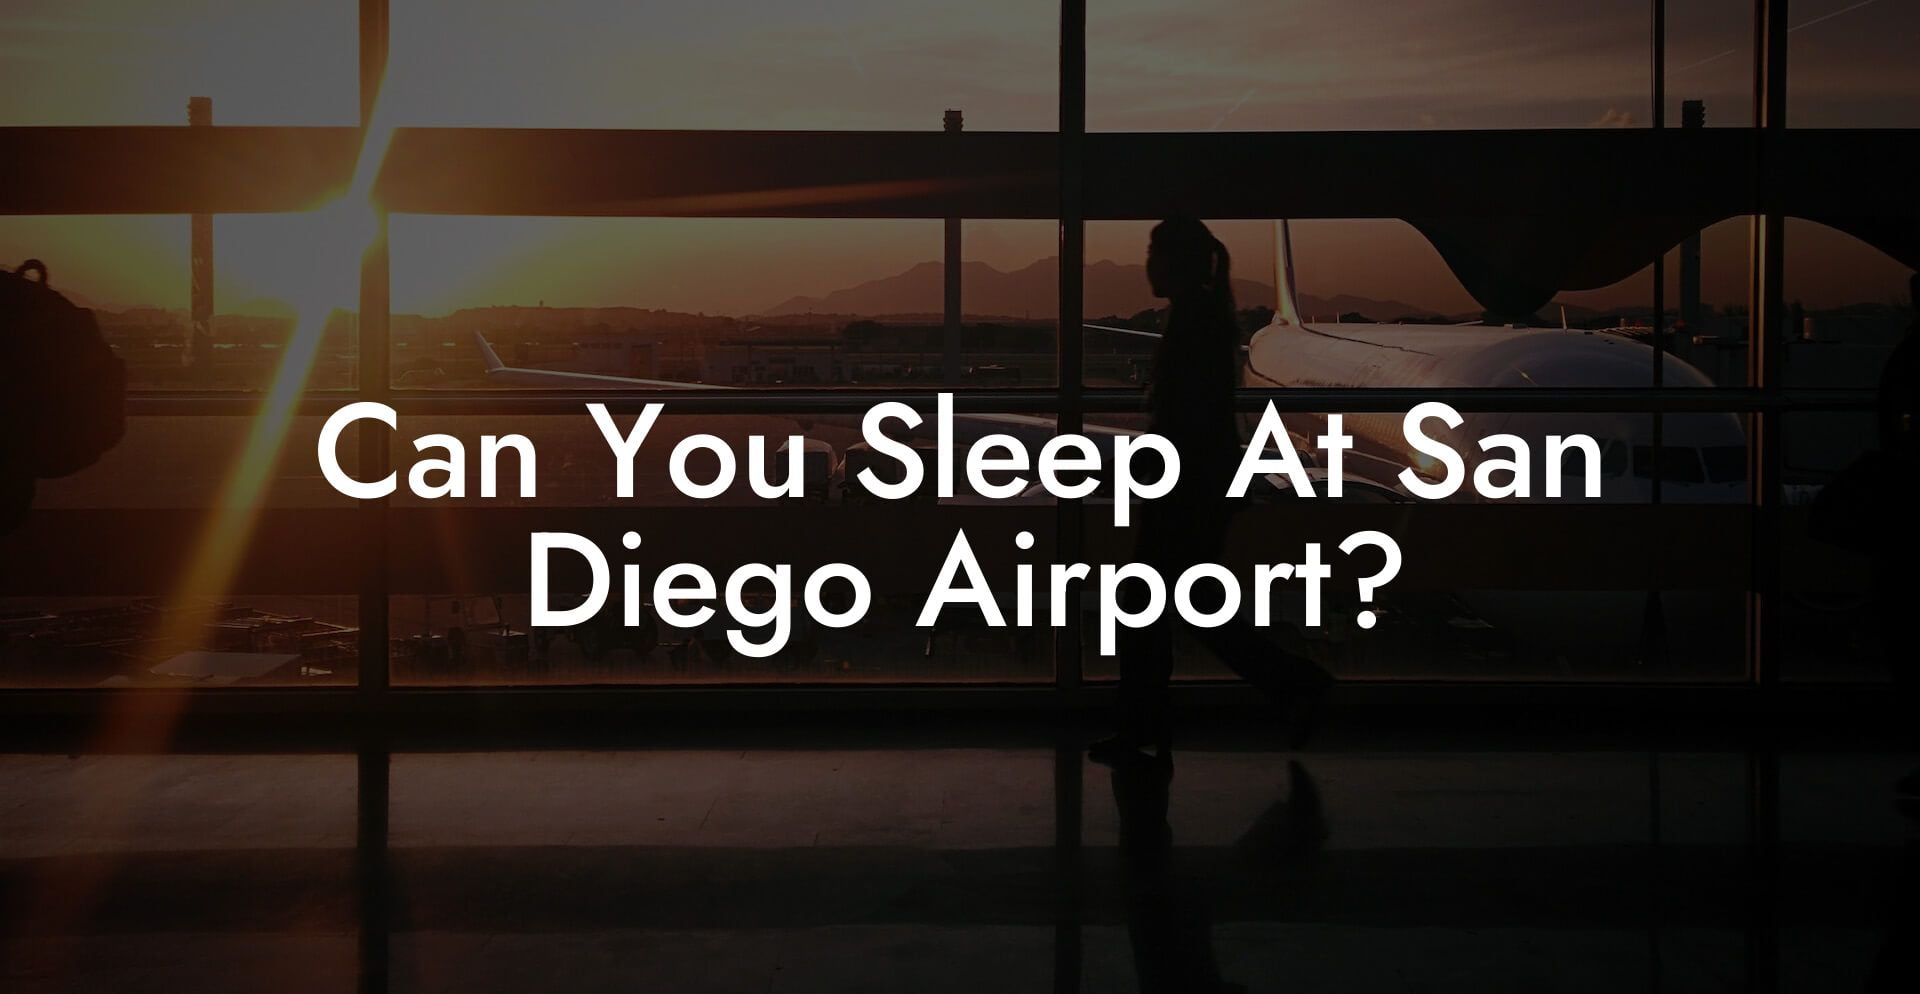 Can You Sleep At San Diego Airport?